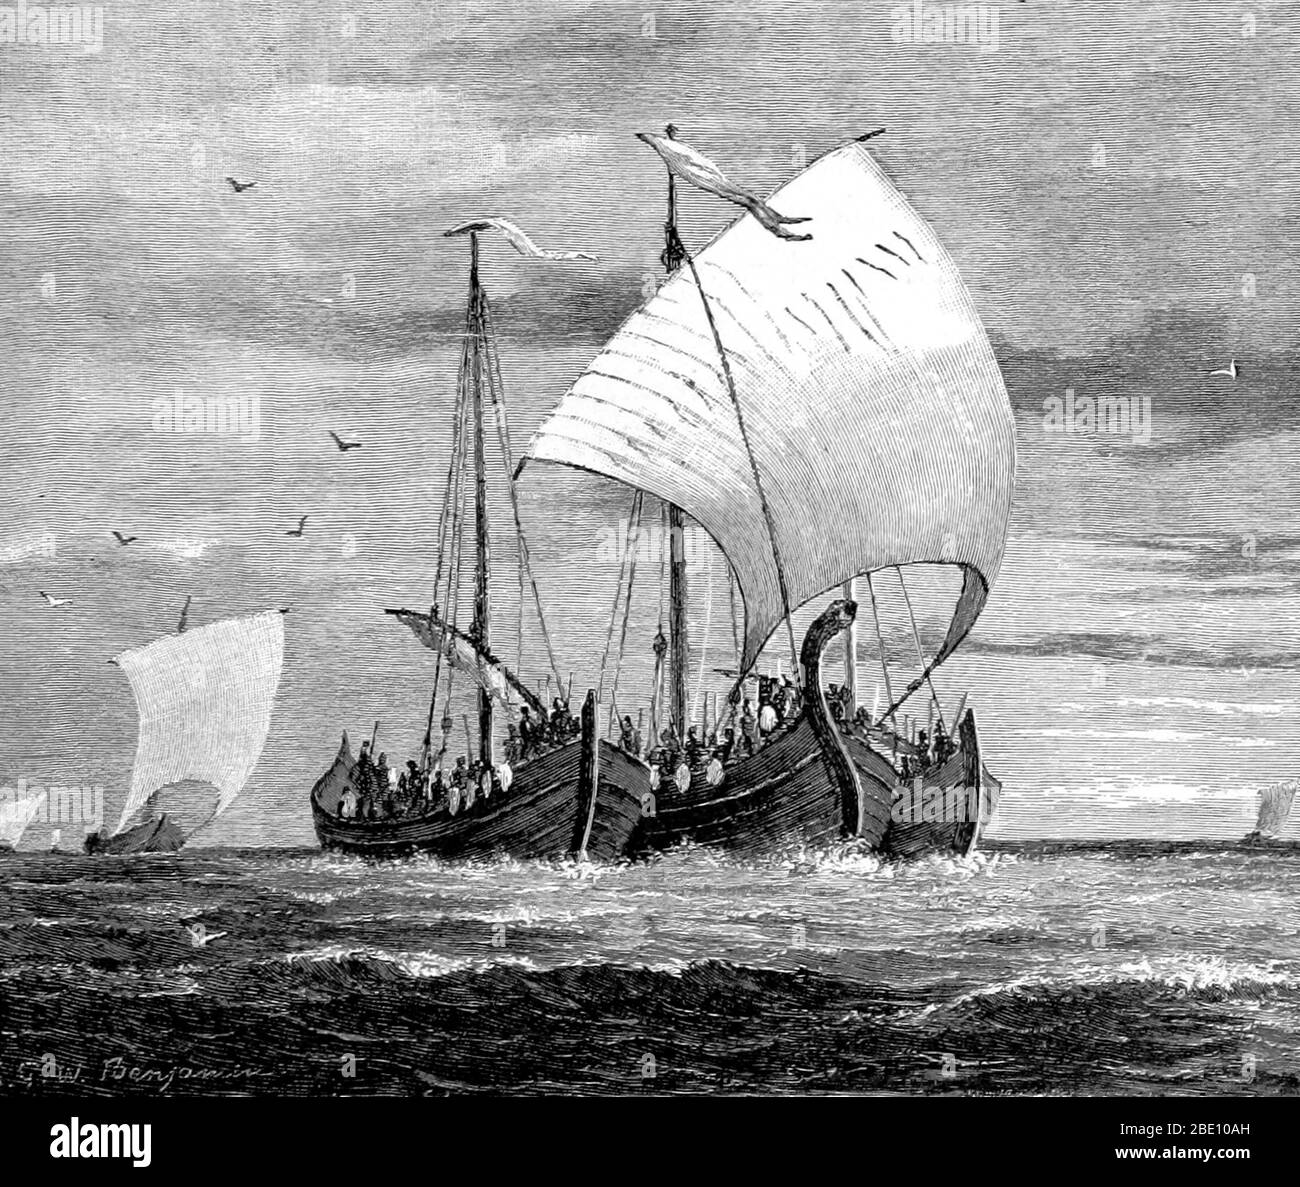 Vikings were Norse seafarers who from their homelands in Scandinavia raided, traded, explored, and settled in wide areas of Europe, Asia, and the North Atlantic islands from the late 8th to the middle 11th centuries. The Vikings employed wooden longships with wide, shallow-draft hulls, allowing navigation in rough seas or in shallow river waters. The ships could be landed on beaches, and their light weight enabled them to be hauled over portages. These versatile ships allowed the Vikings to settle and travel as far east as Constantinople and the Volga River in Russia, as far west as Iceland, G Stock Photo